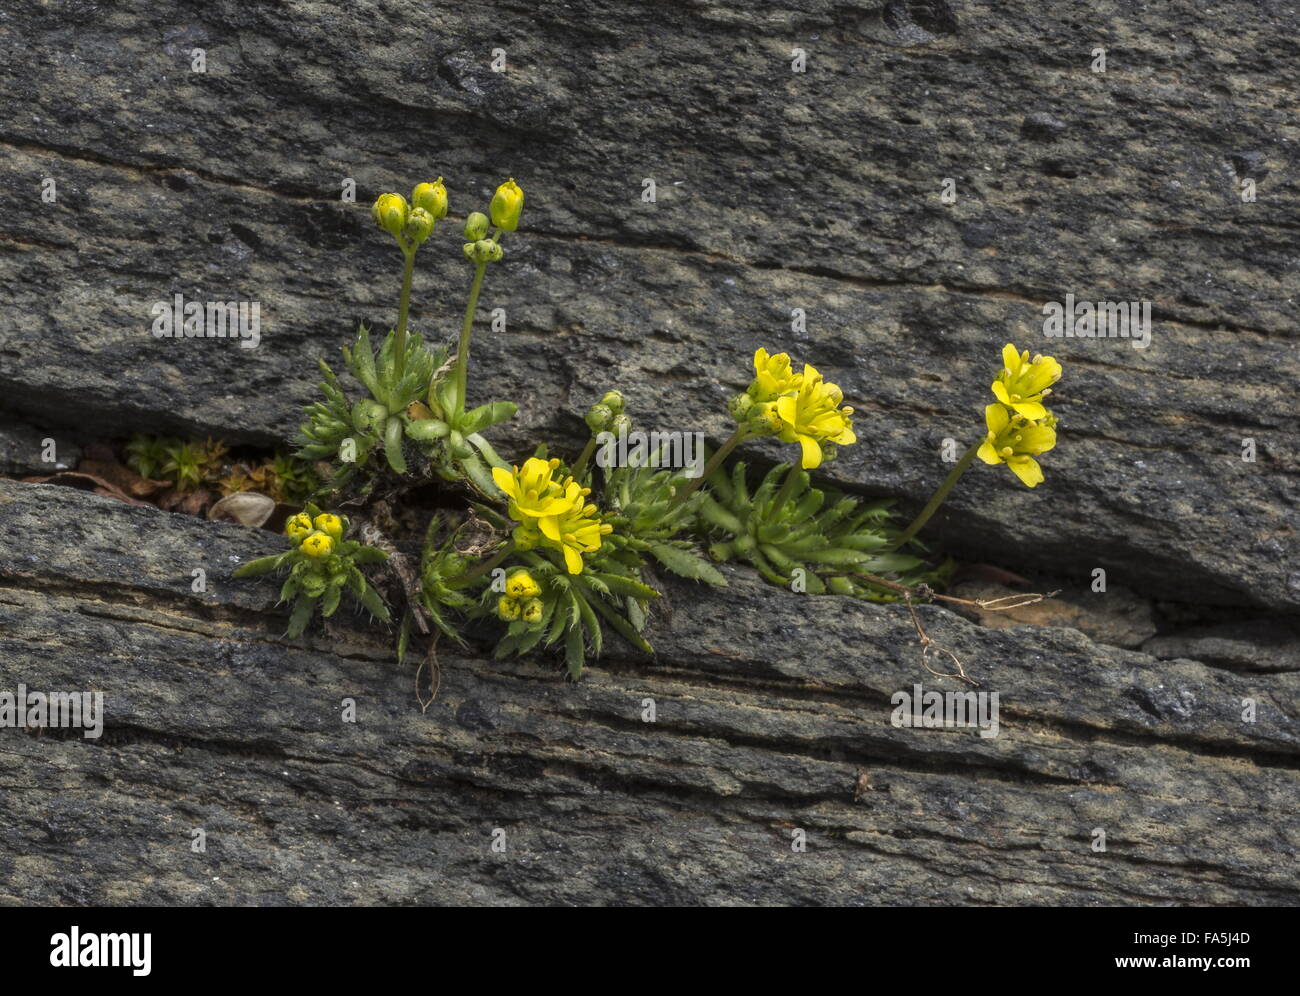 Yellow Whitlowgrass, Draba aizoides in flower on rock at high altitude, Swiss Alps. Stock Photo